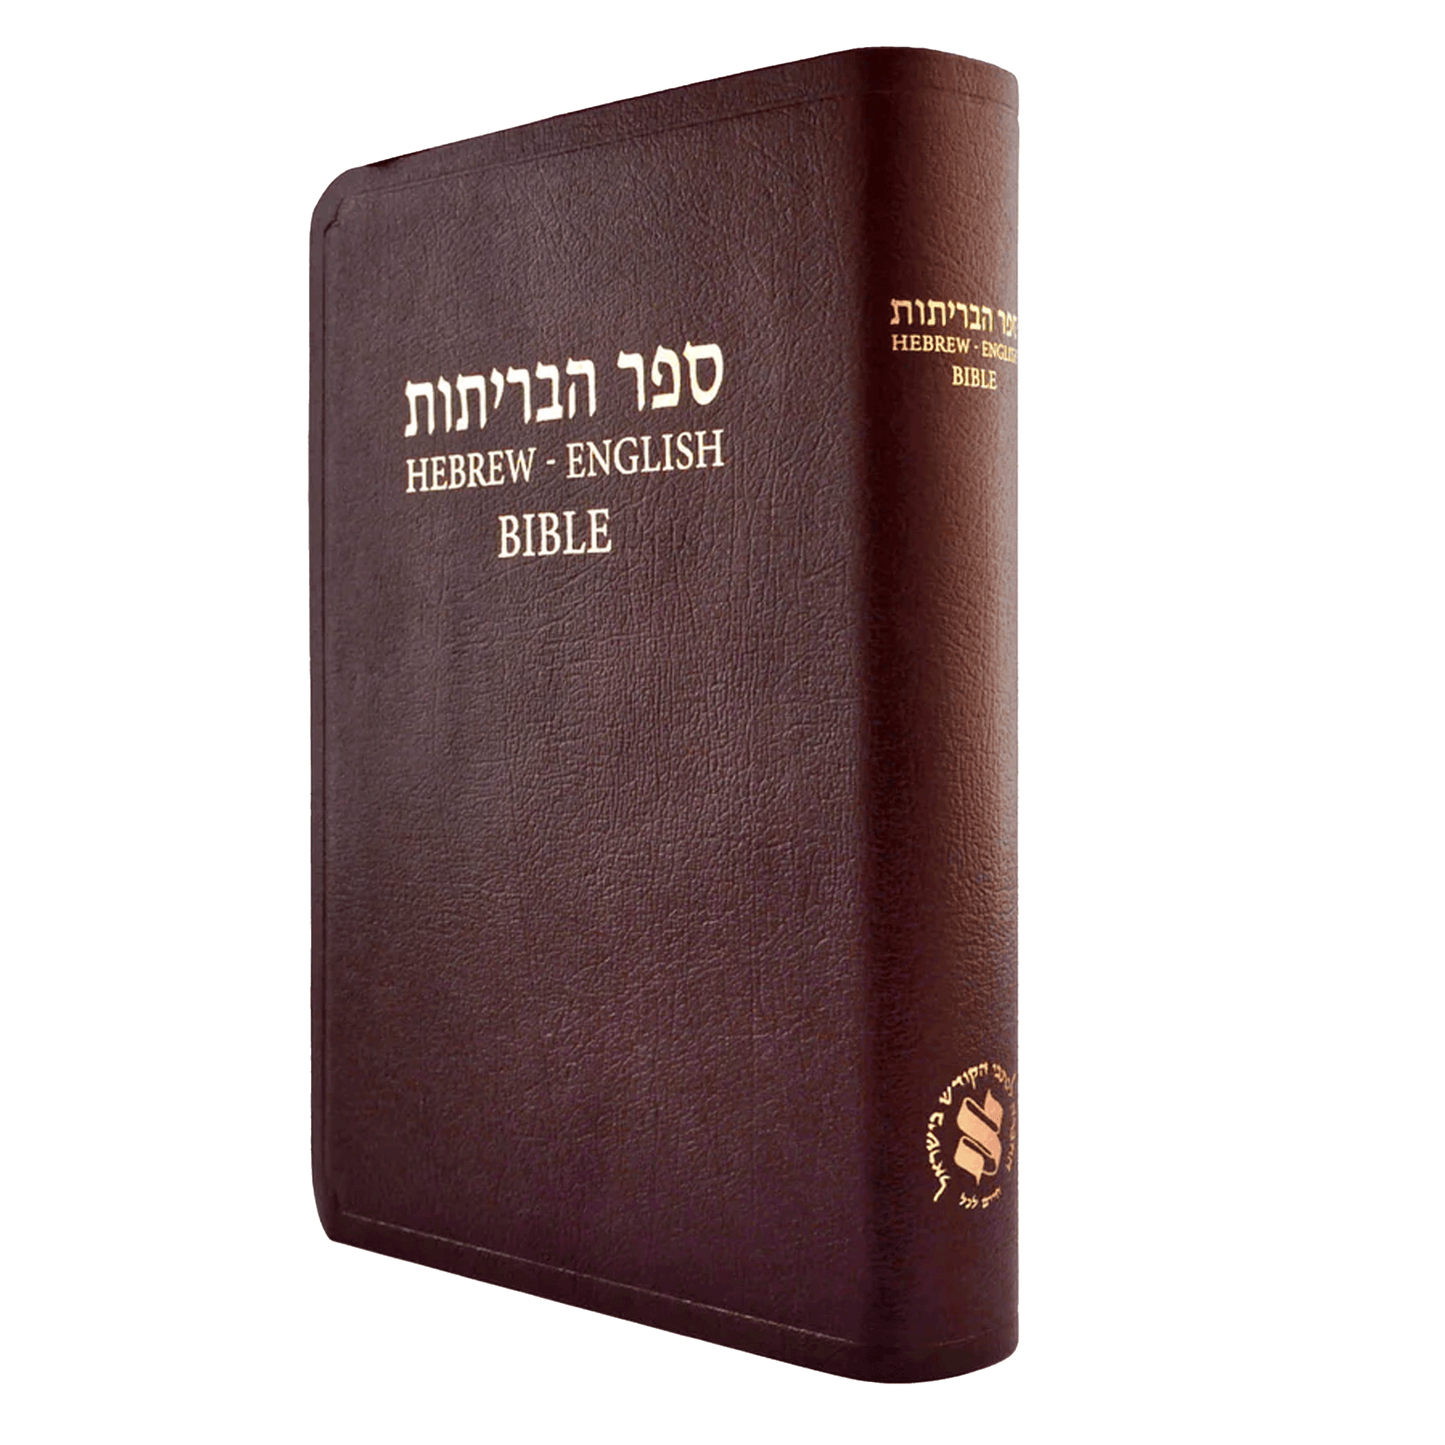 Hebrew-English (NASB) Diglot Bible- Leather with Zipper